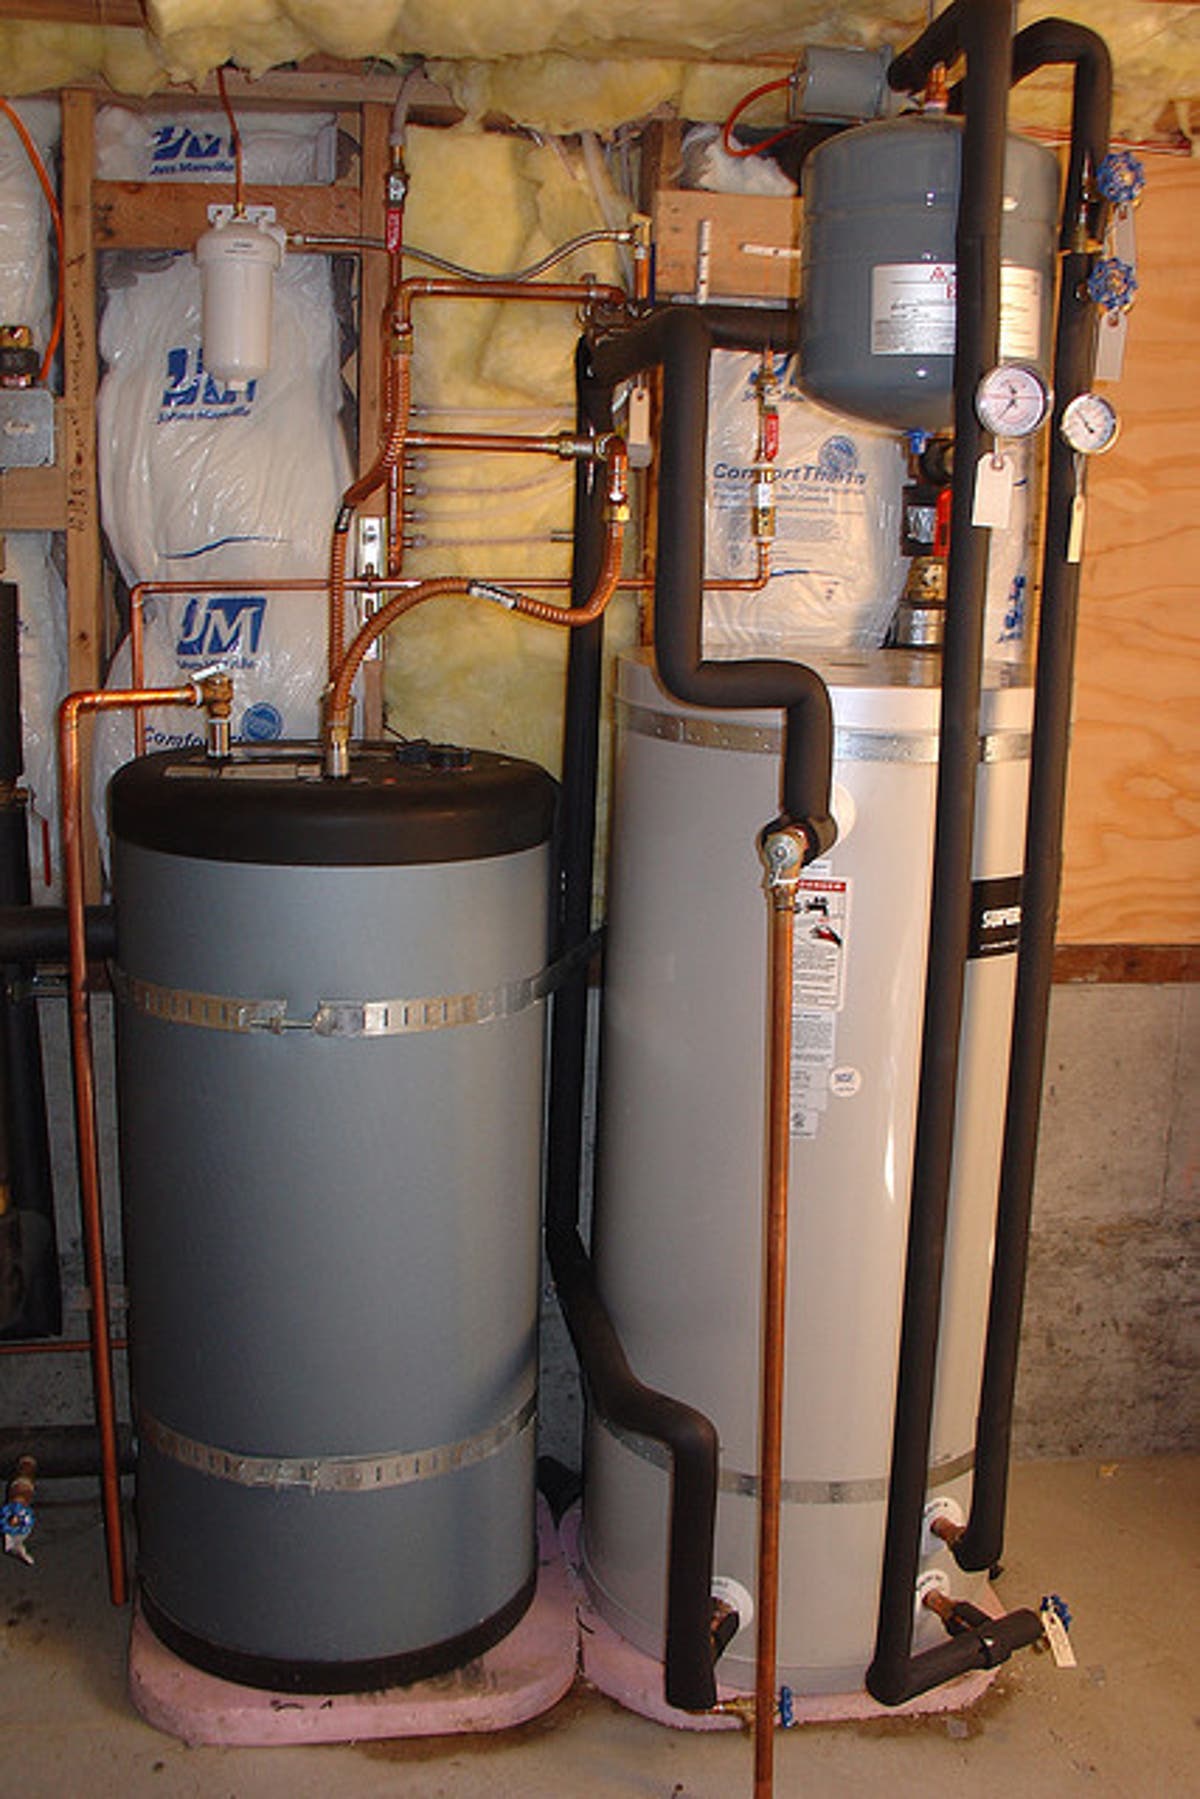 Insulate Your Hot Water Heater to Make it More Energy Efficient